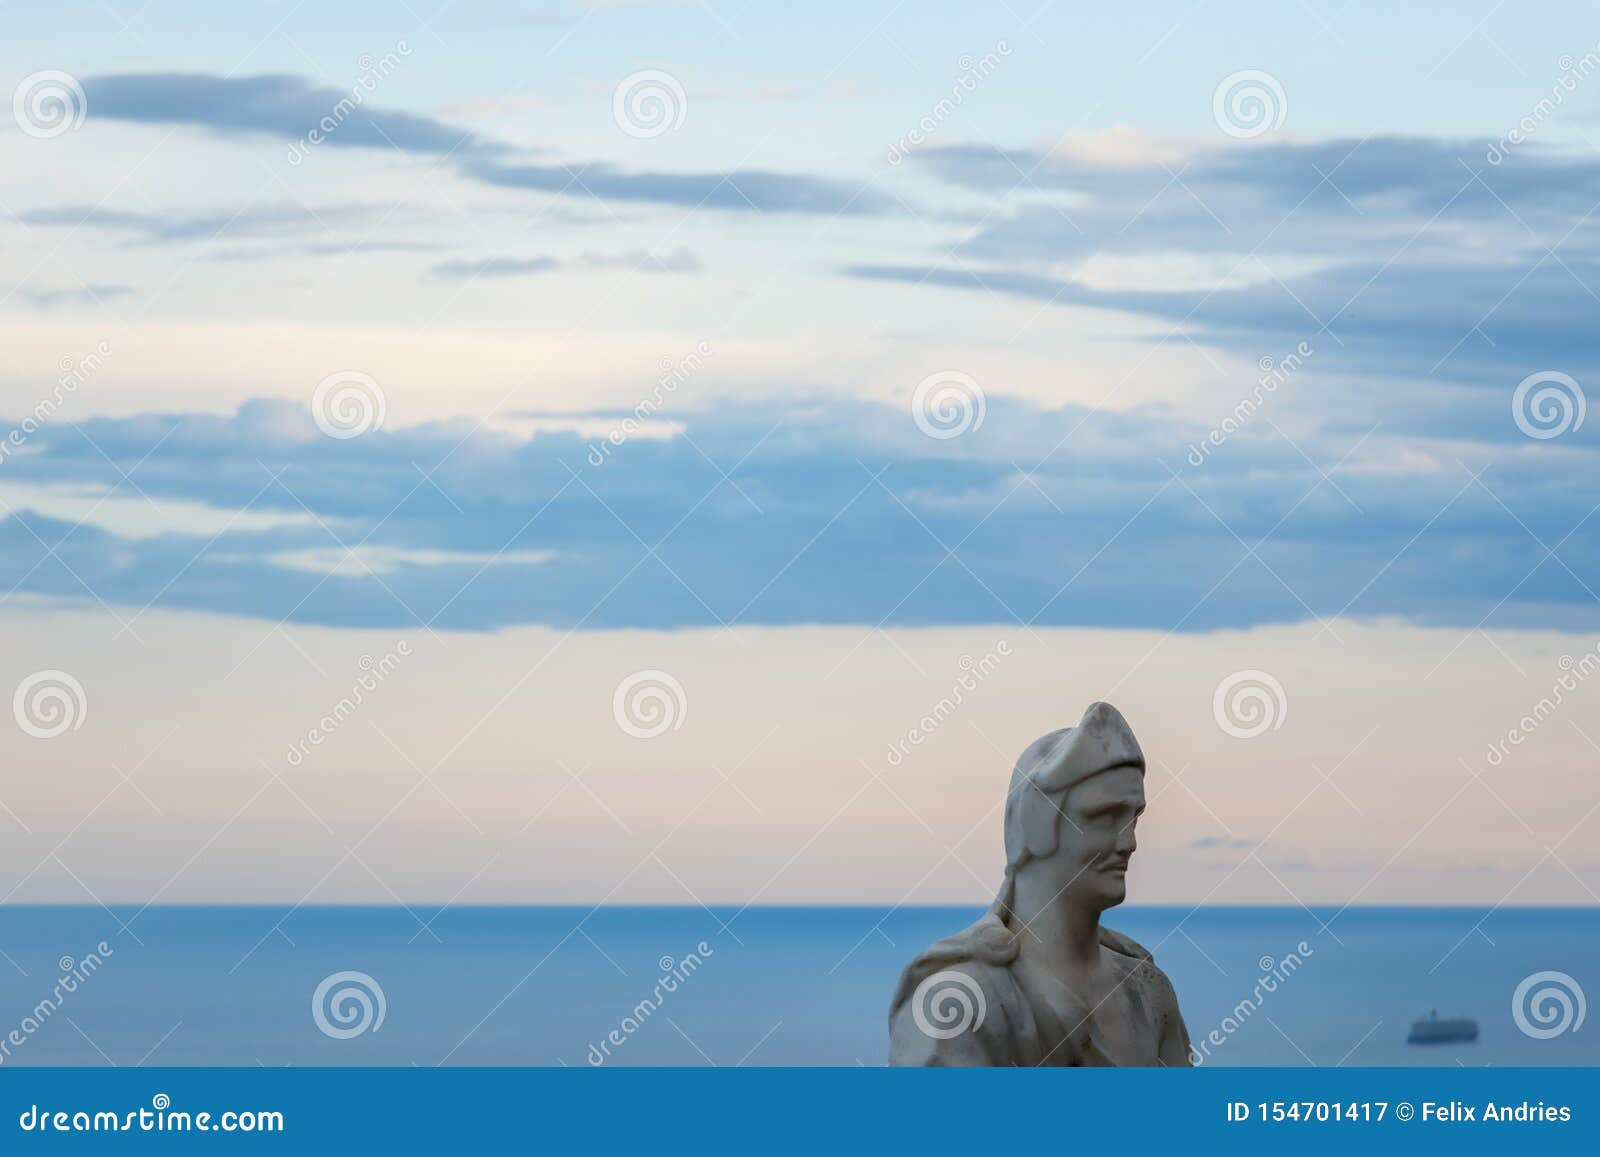 male statue from the belvedere, the so-called terrazza dell`infinito, the terrace of infinity seen on the sunset, villa cimbrone,